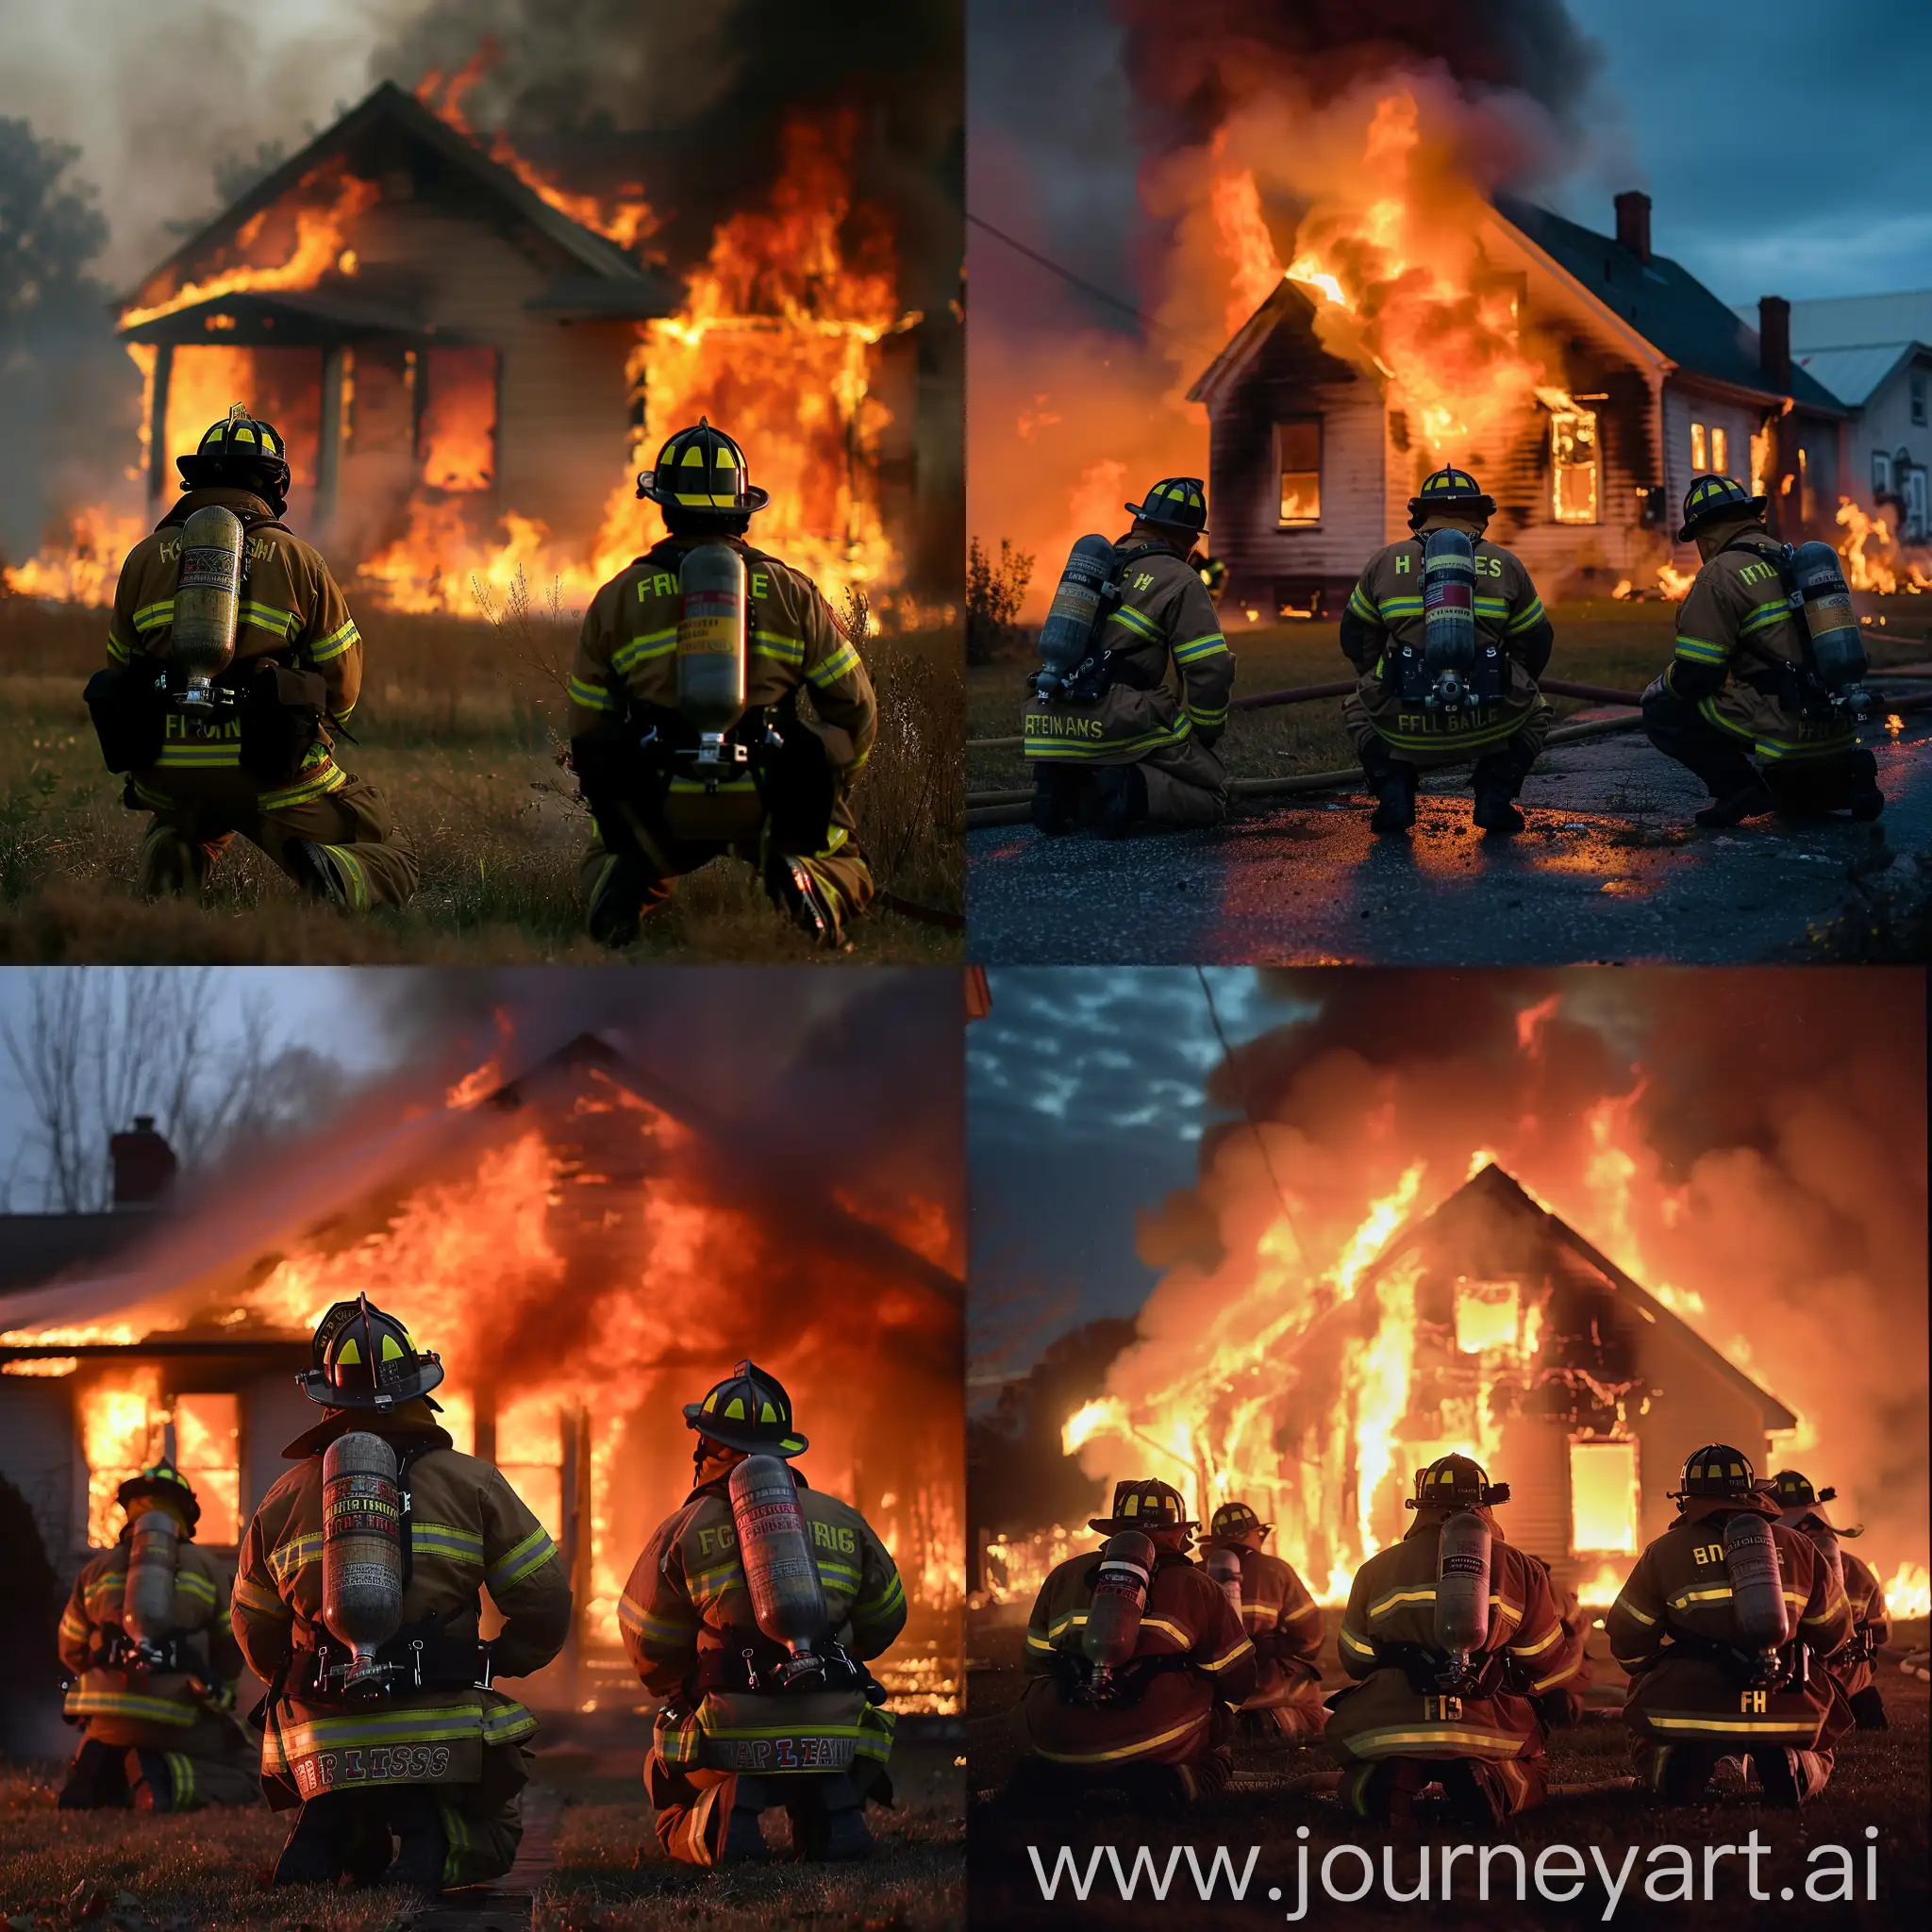 Firefighters-Pay-Tribute-in-Front-of-Burning-House